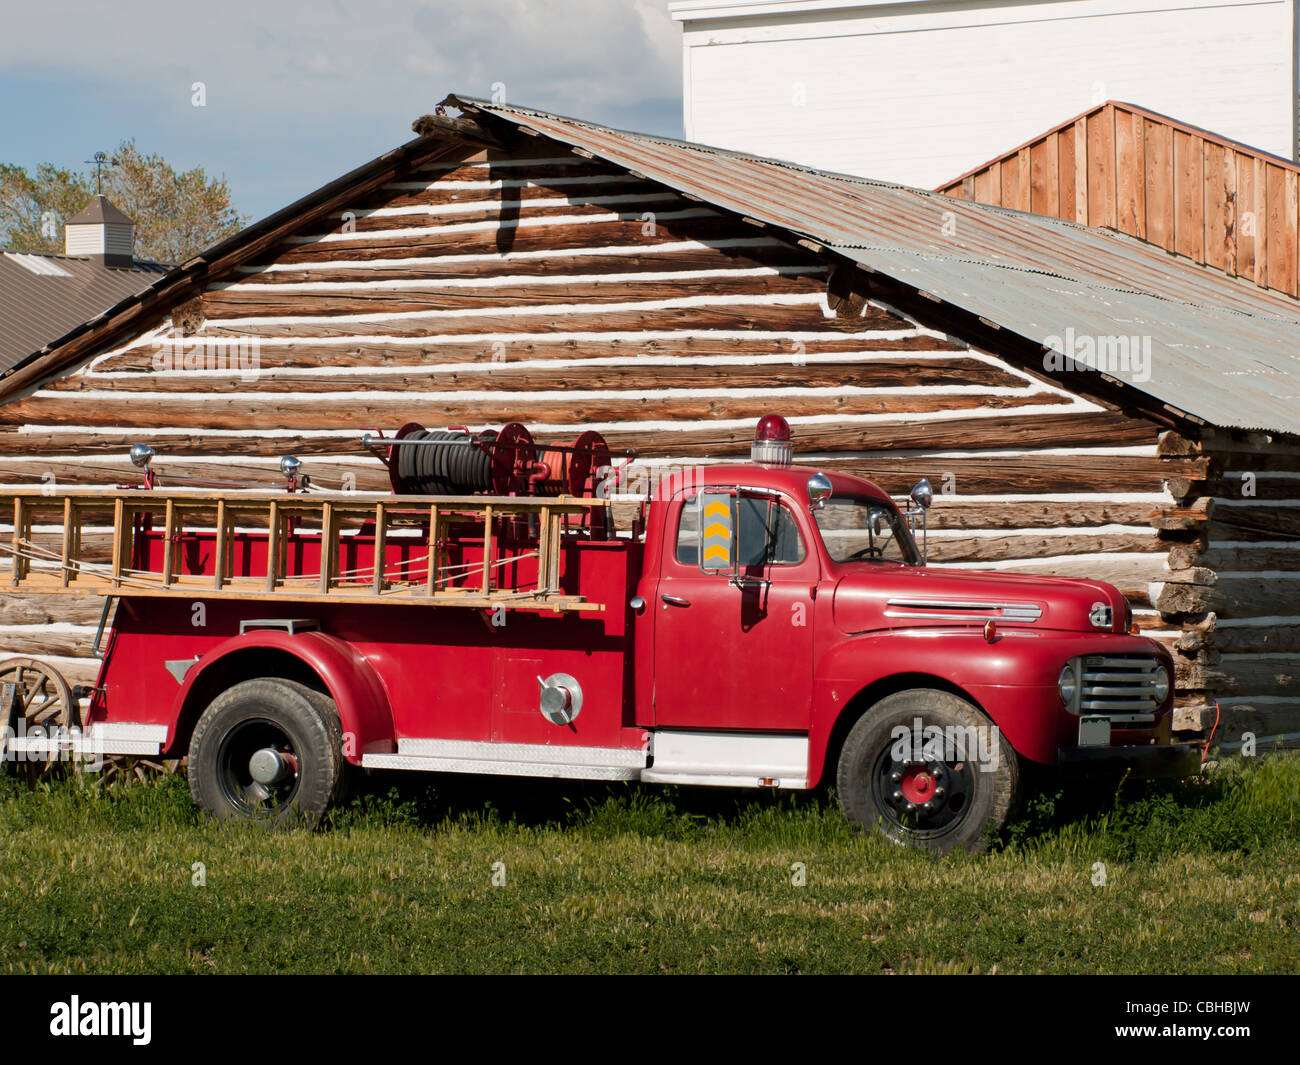 A mint-condition antique firetruck shines in the sun. Museum of the Mountain West in Montrose, Colorado. Stock Photo